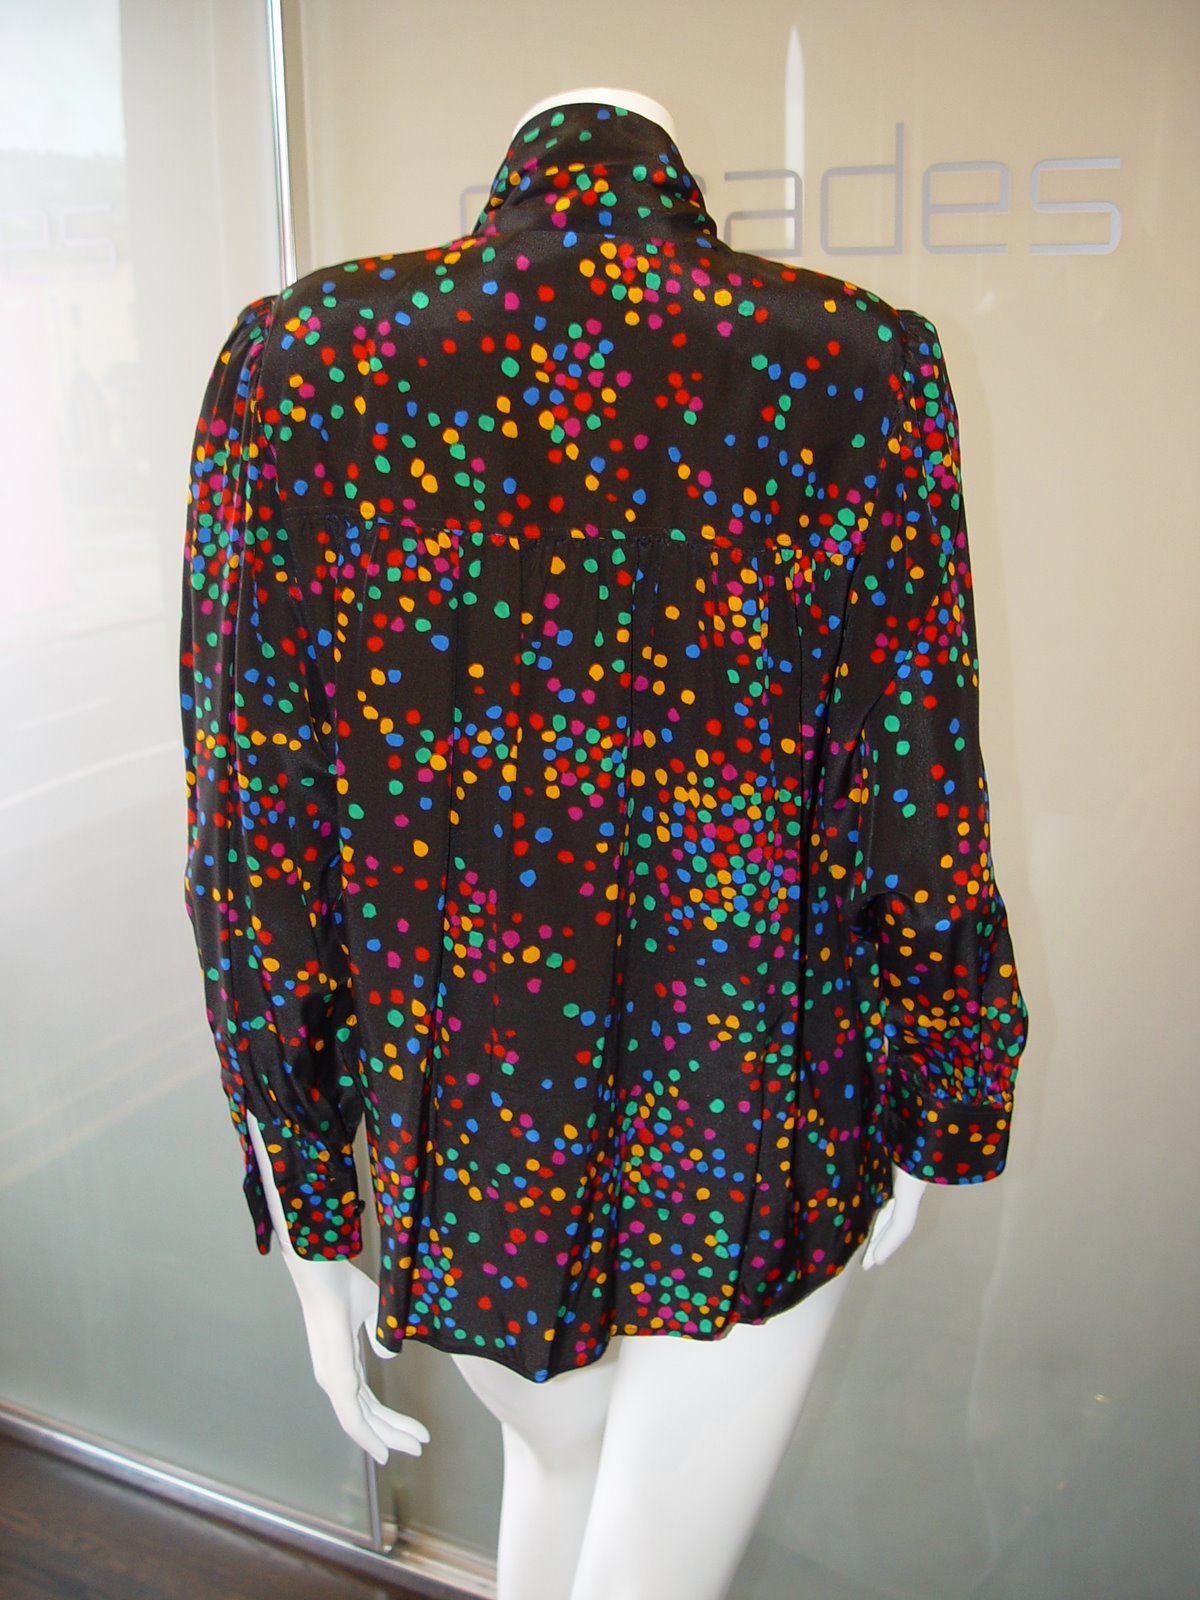 [YSL+RIVE+GAUCHE+BLACK+SILK+BLOUSE+WITH+OLIVE+BLUE+RED+WHITE+DOTS+C+80S+KEY+HOLEMARKED+SIZE+34.JPG.JPG]